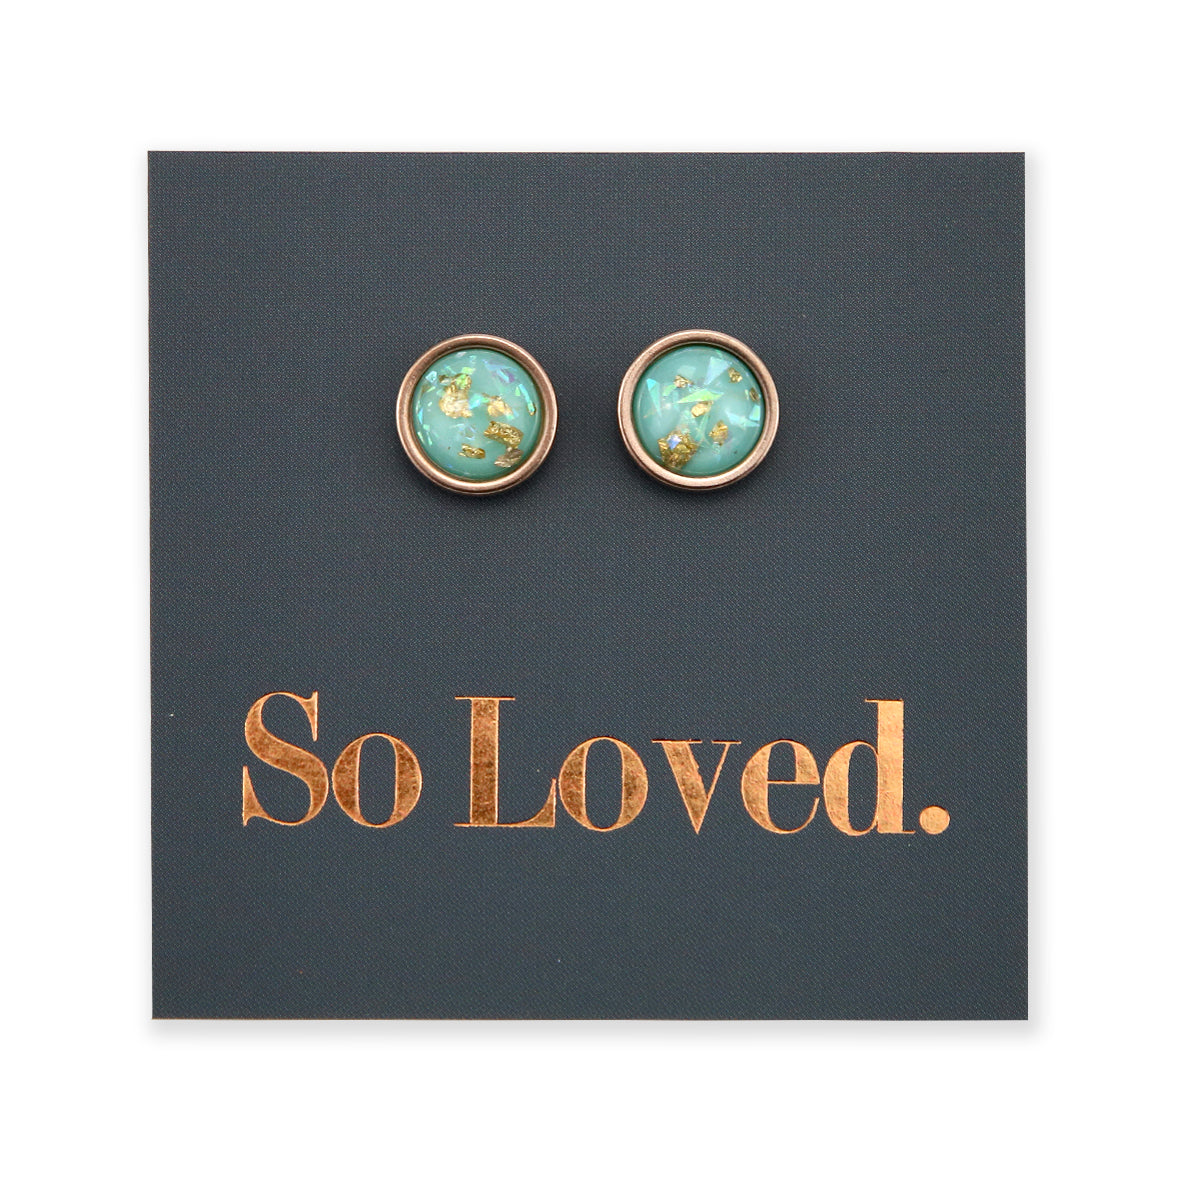 So Loved - Rose Gold Stainless Steel 8mm Circle Studs - Aqua Leaf (12362)